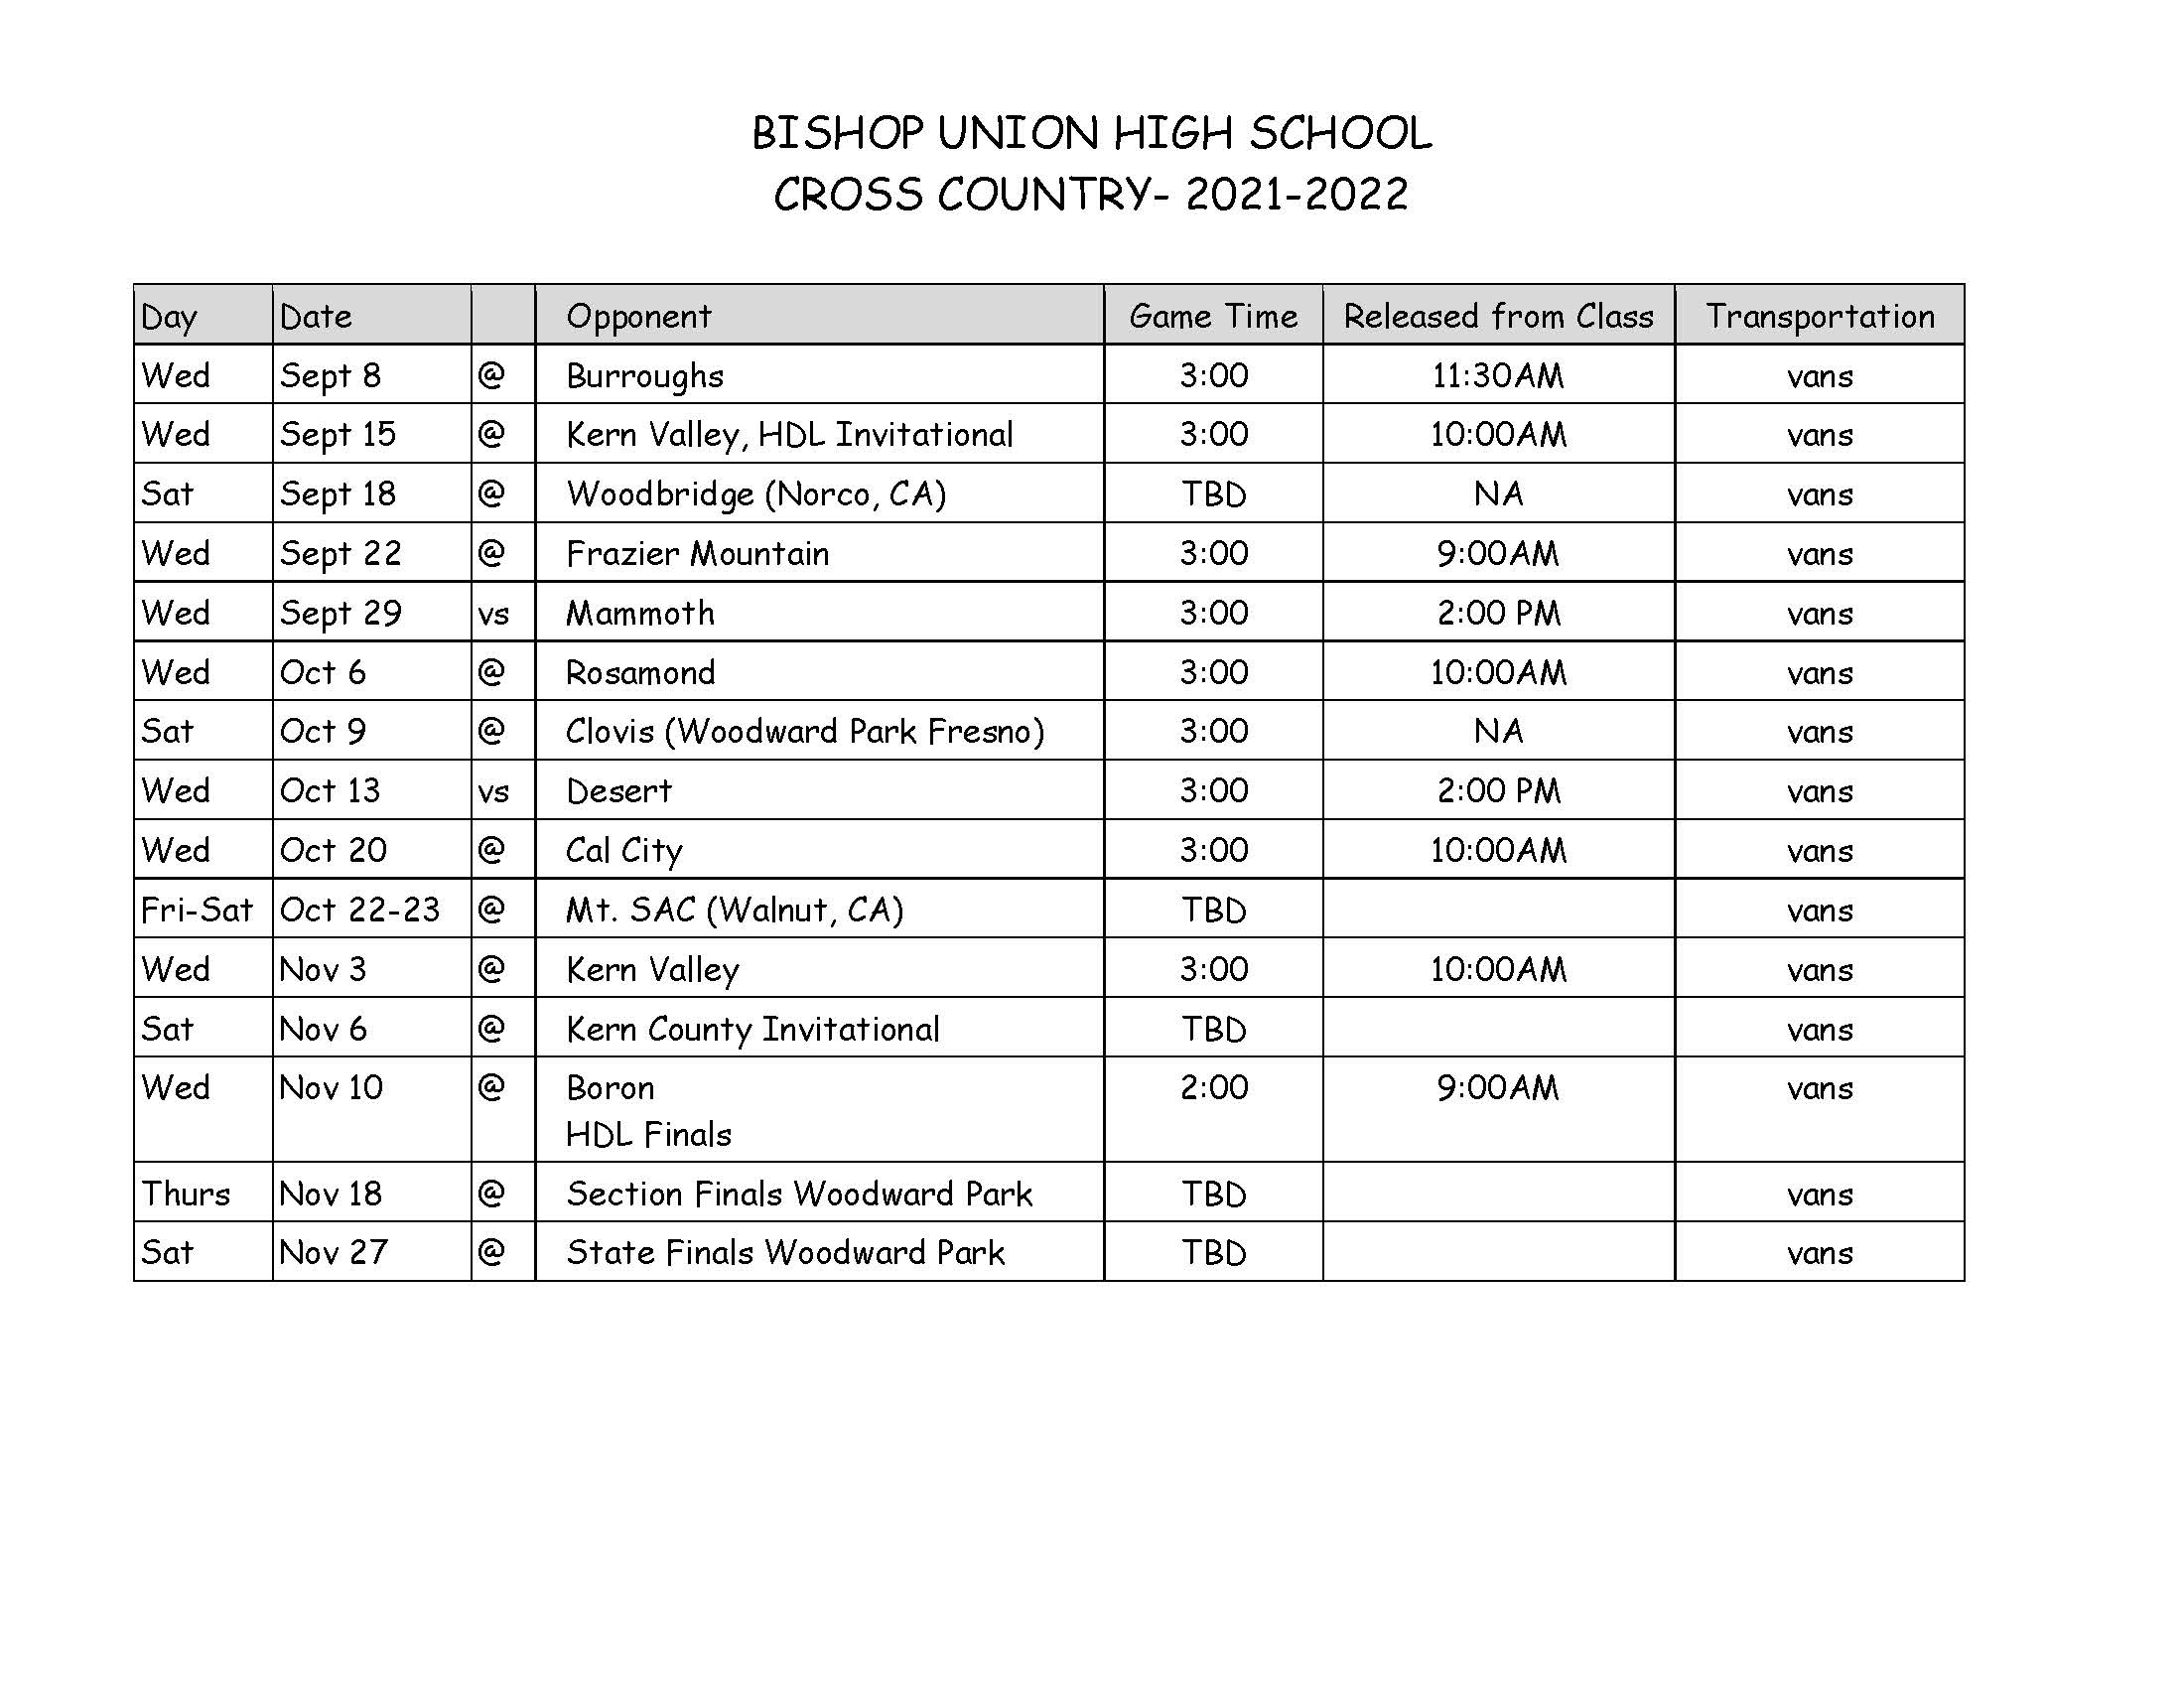 2021-22 CROSS COUNTRY SCHEDULE